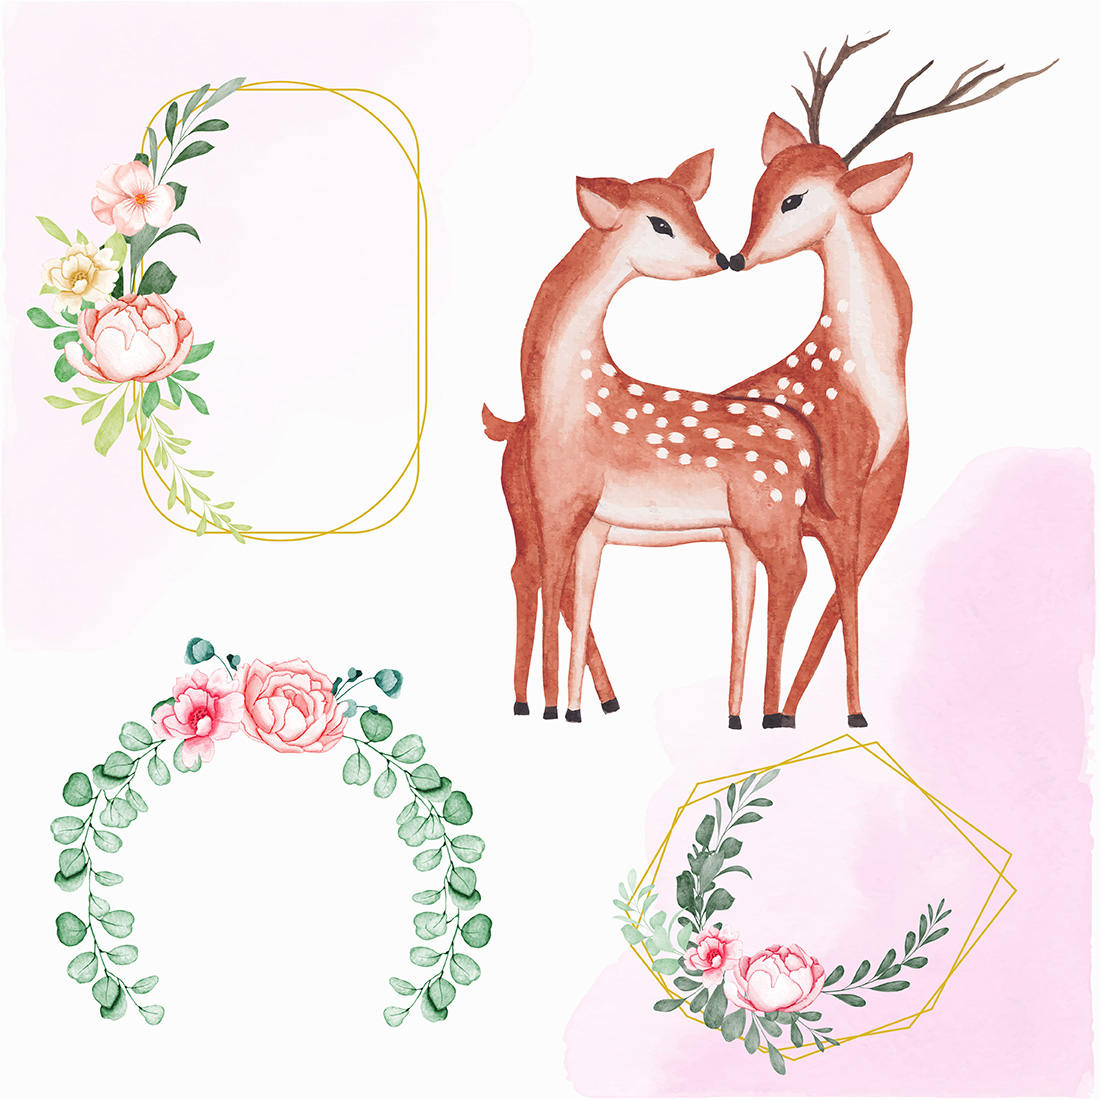 Some floral frames and cute deer couple.